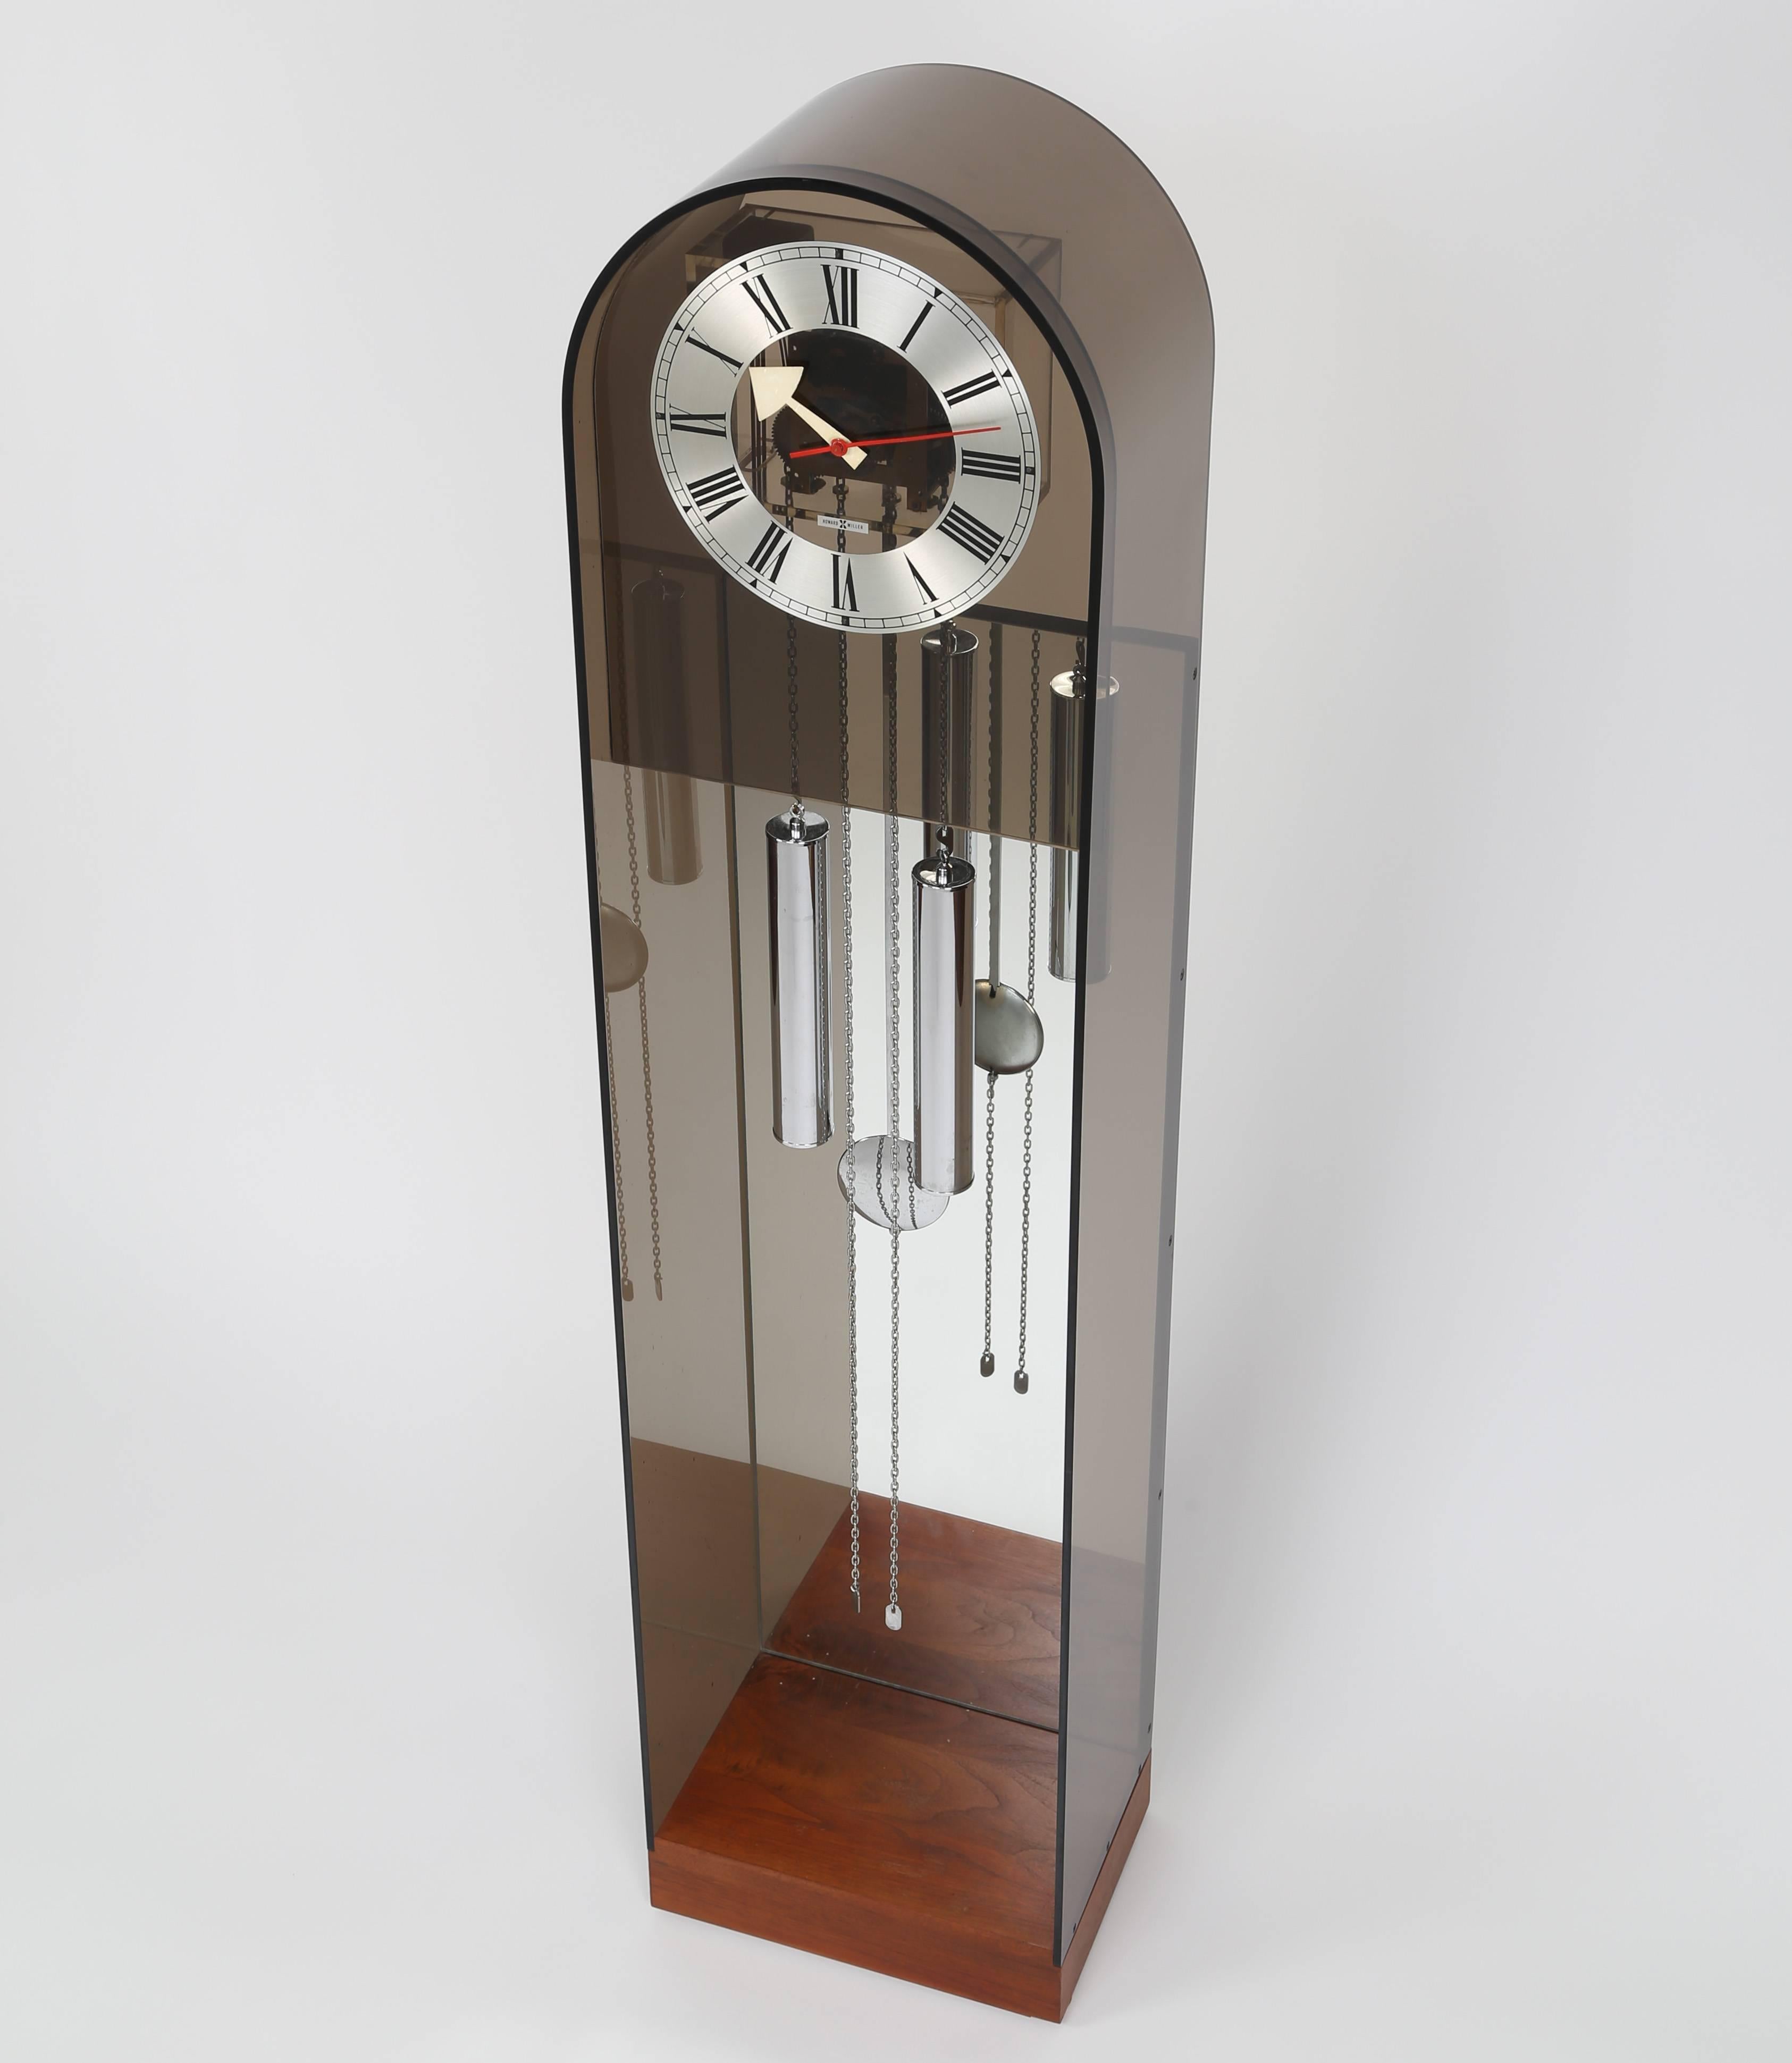 Howard Miller tall case clock in smoked Lucite with a walnut base, mirrored back, and chrome weights and pendulum. Mechanical movement is driven by traditional weights on chains. Howard Miller, Zealand, MI, USA, circa 1970s. Manufacturer label.